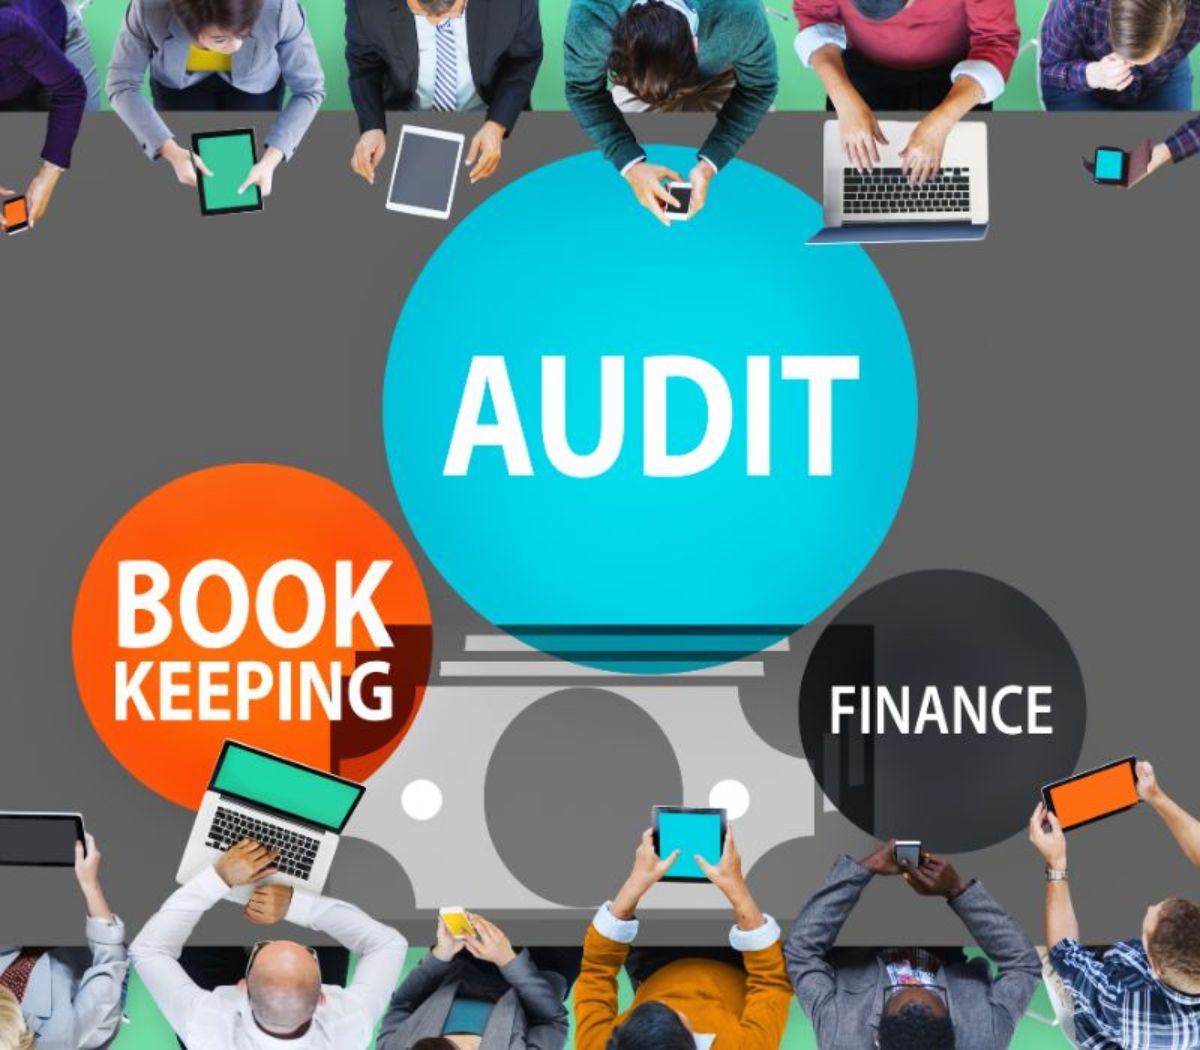 bookkeeping-services-audit-bookkeeping-finance-money-report-min